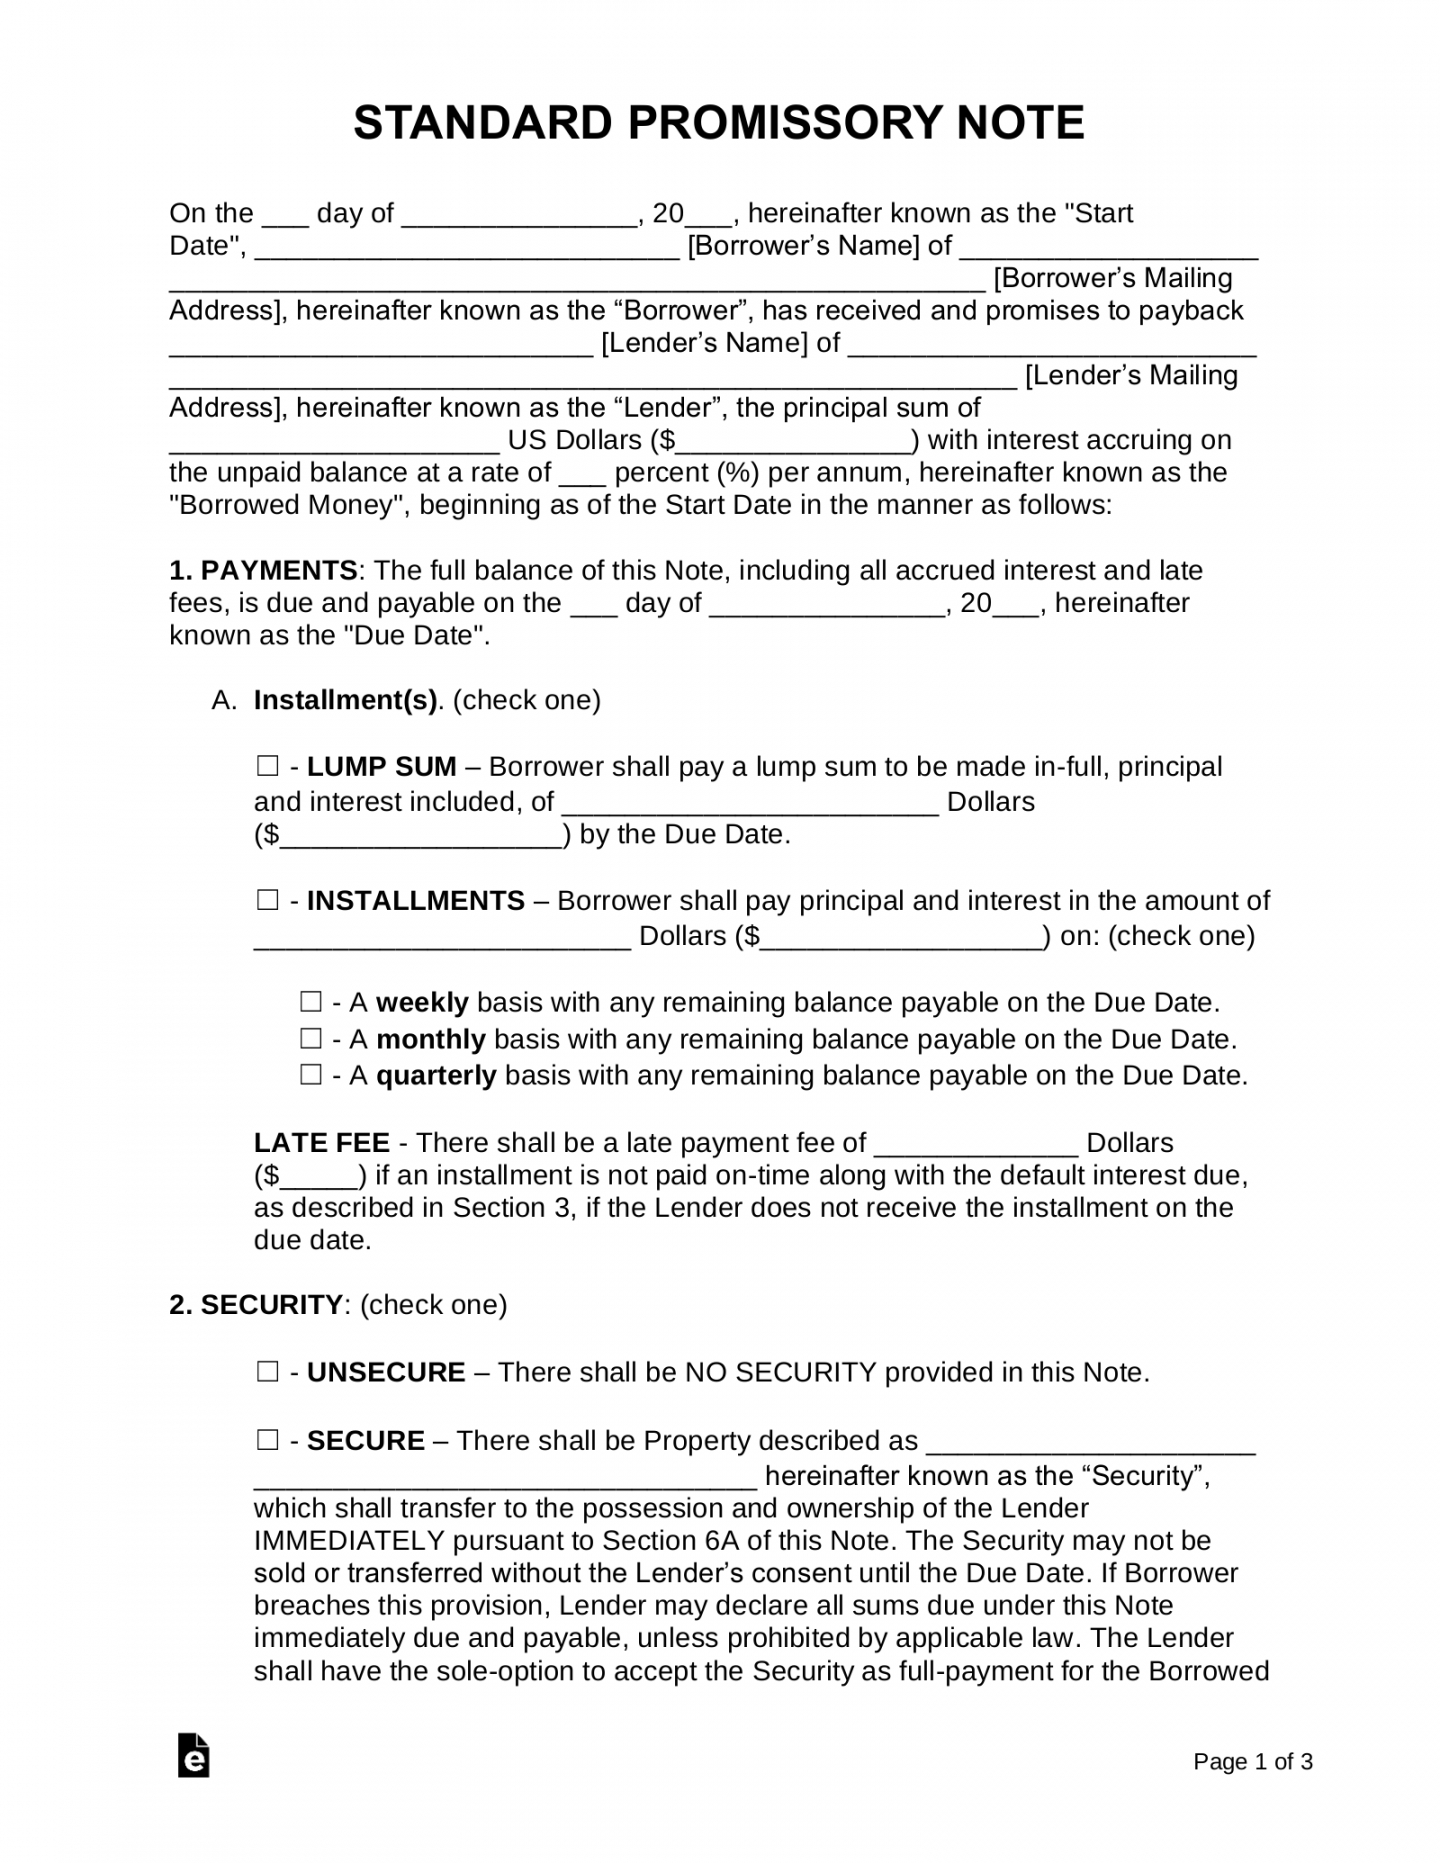 printable free promissory note templates  word  pdf  eforms  free generic promissory note template